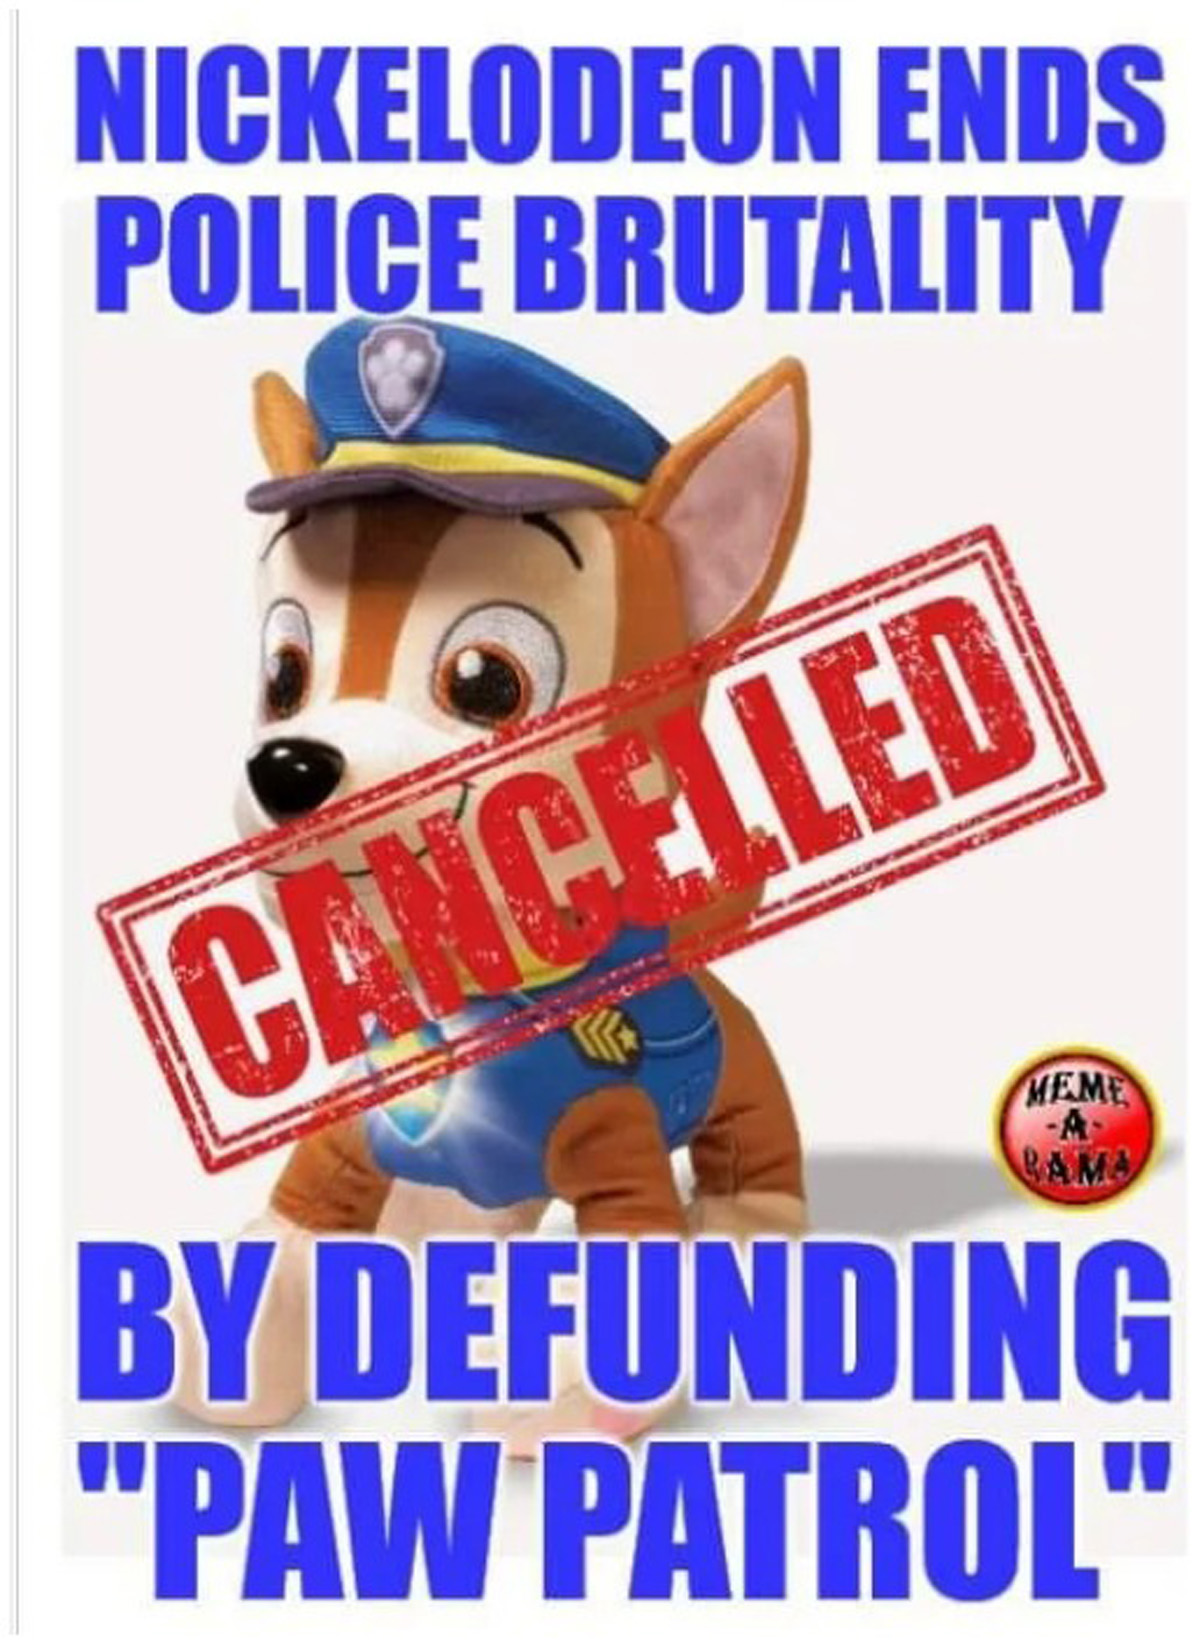 Is Paw Patrol really being canceled after 2020 protests?